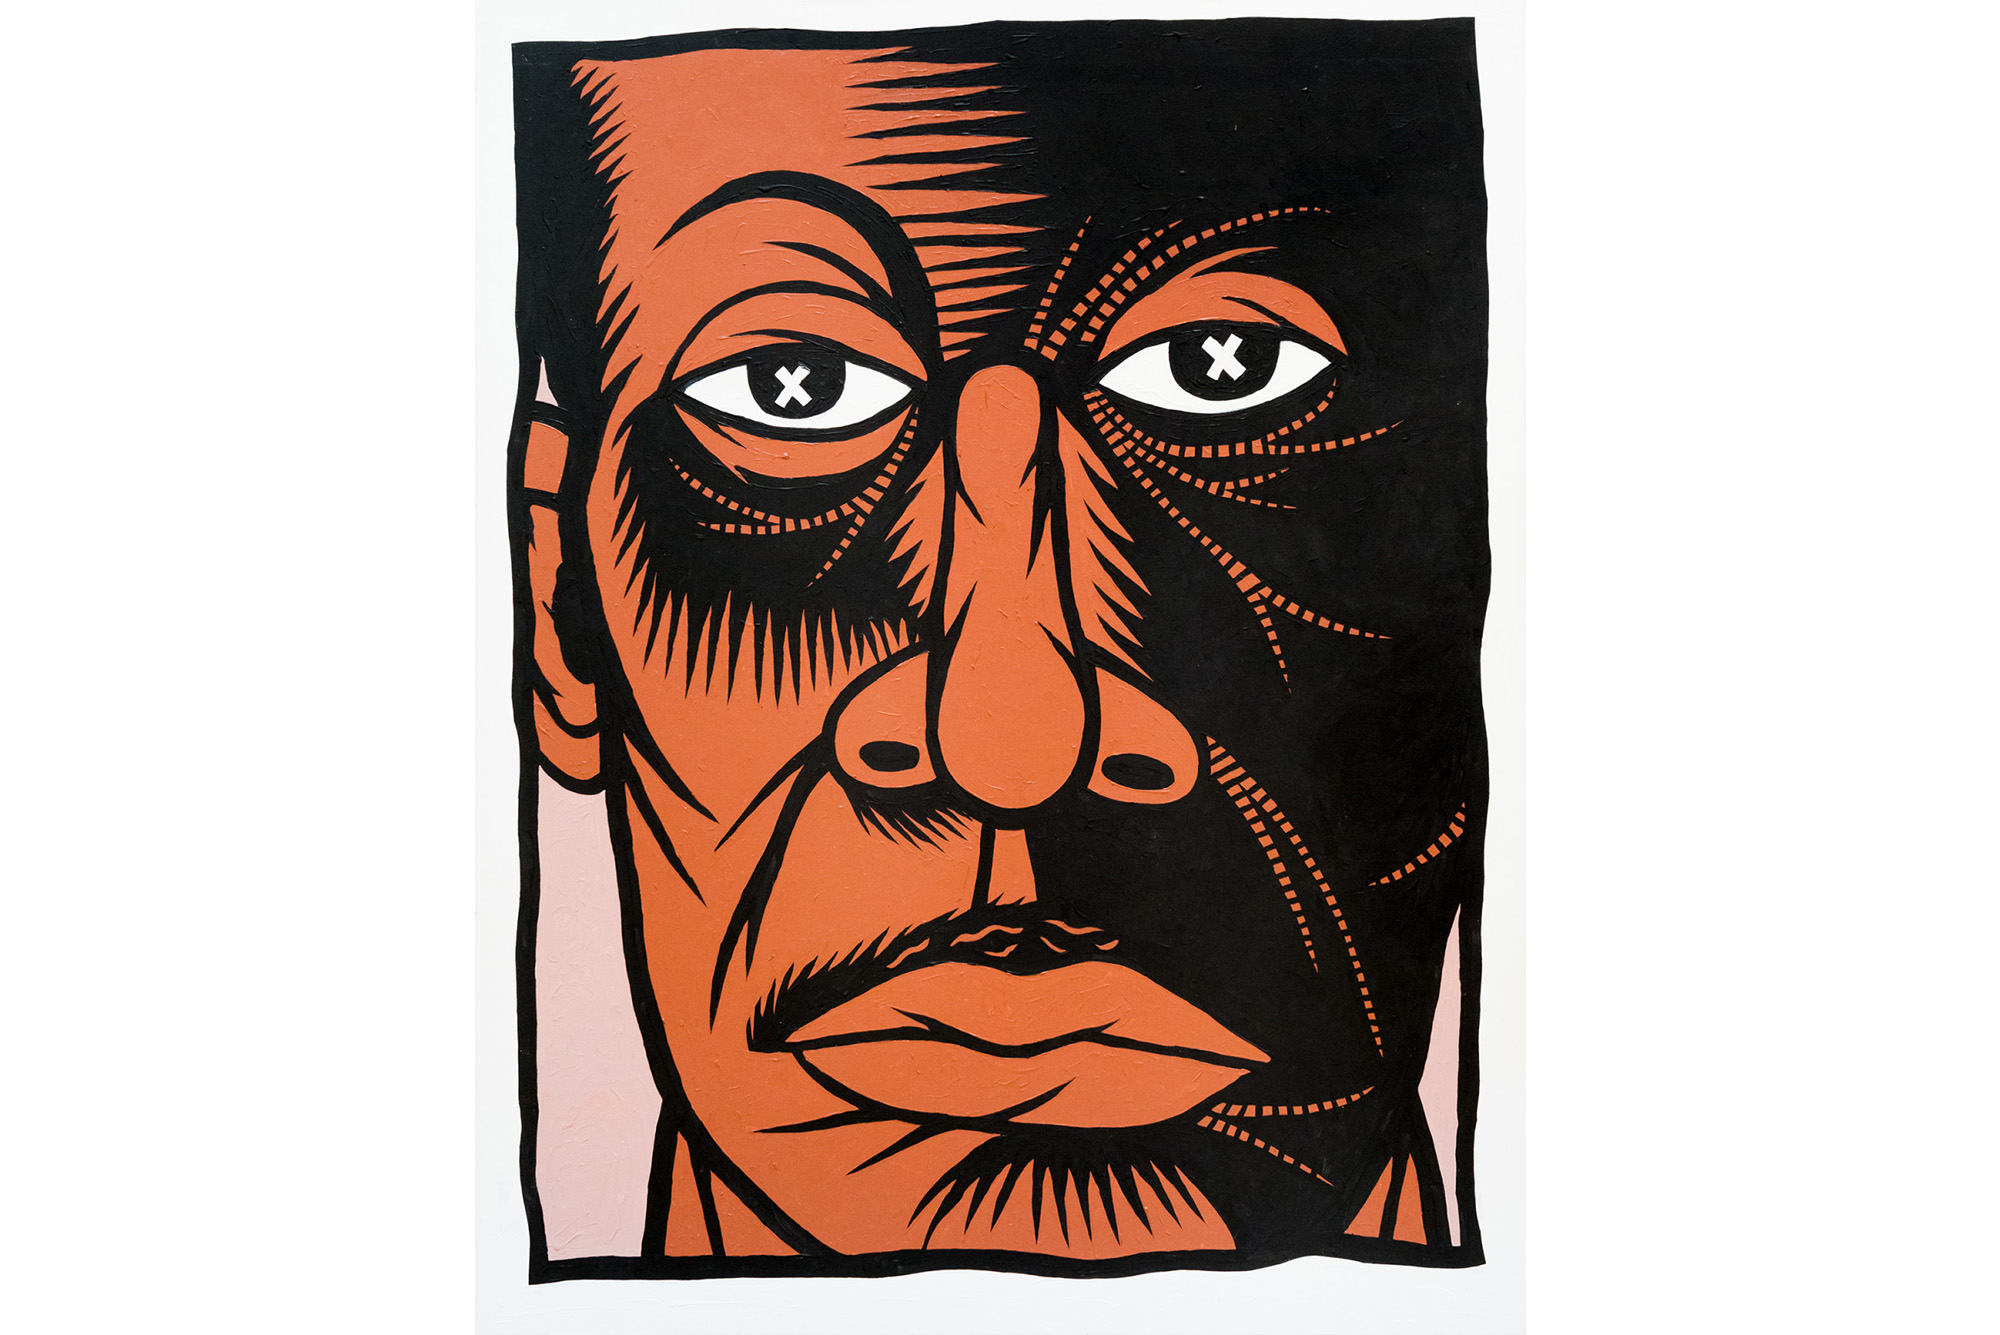 Thom Shaw's Today I am No One, What about 2 Hours from Now, a close up, abstract portrait of an African American man blankly staring at the viewer, the left half of his face is fully black with faint outlines of his facial features. In place of pupils are white X's within black dots